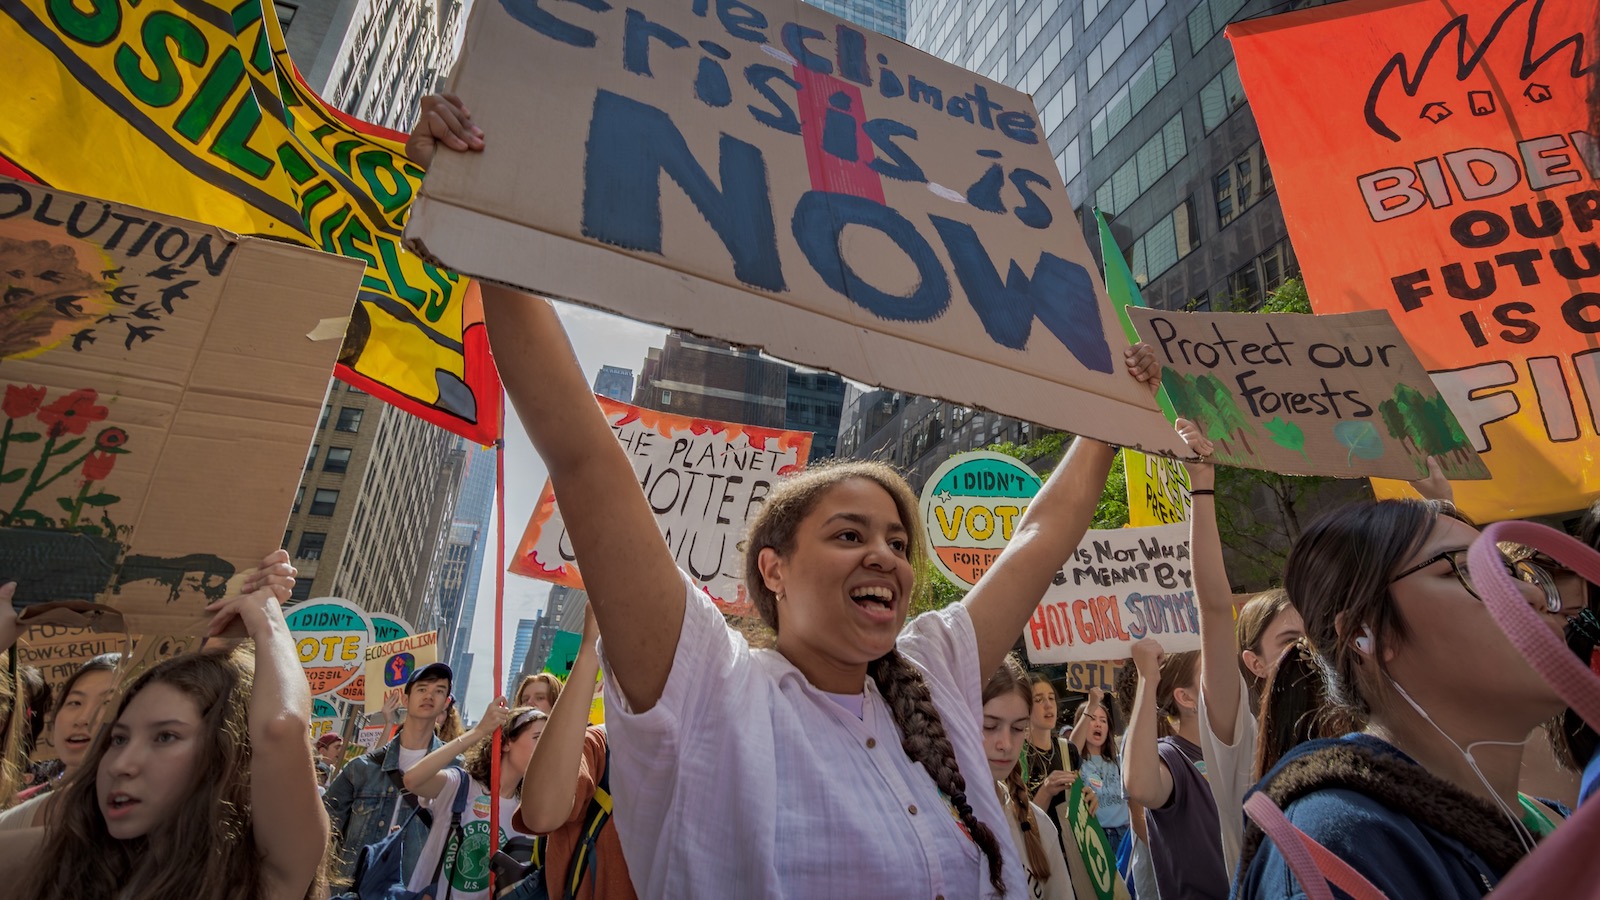 Youth climate activists waving pickets join a demonstration in New York City demanding climate action.